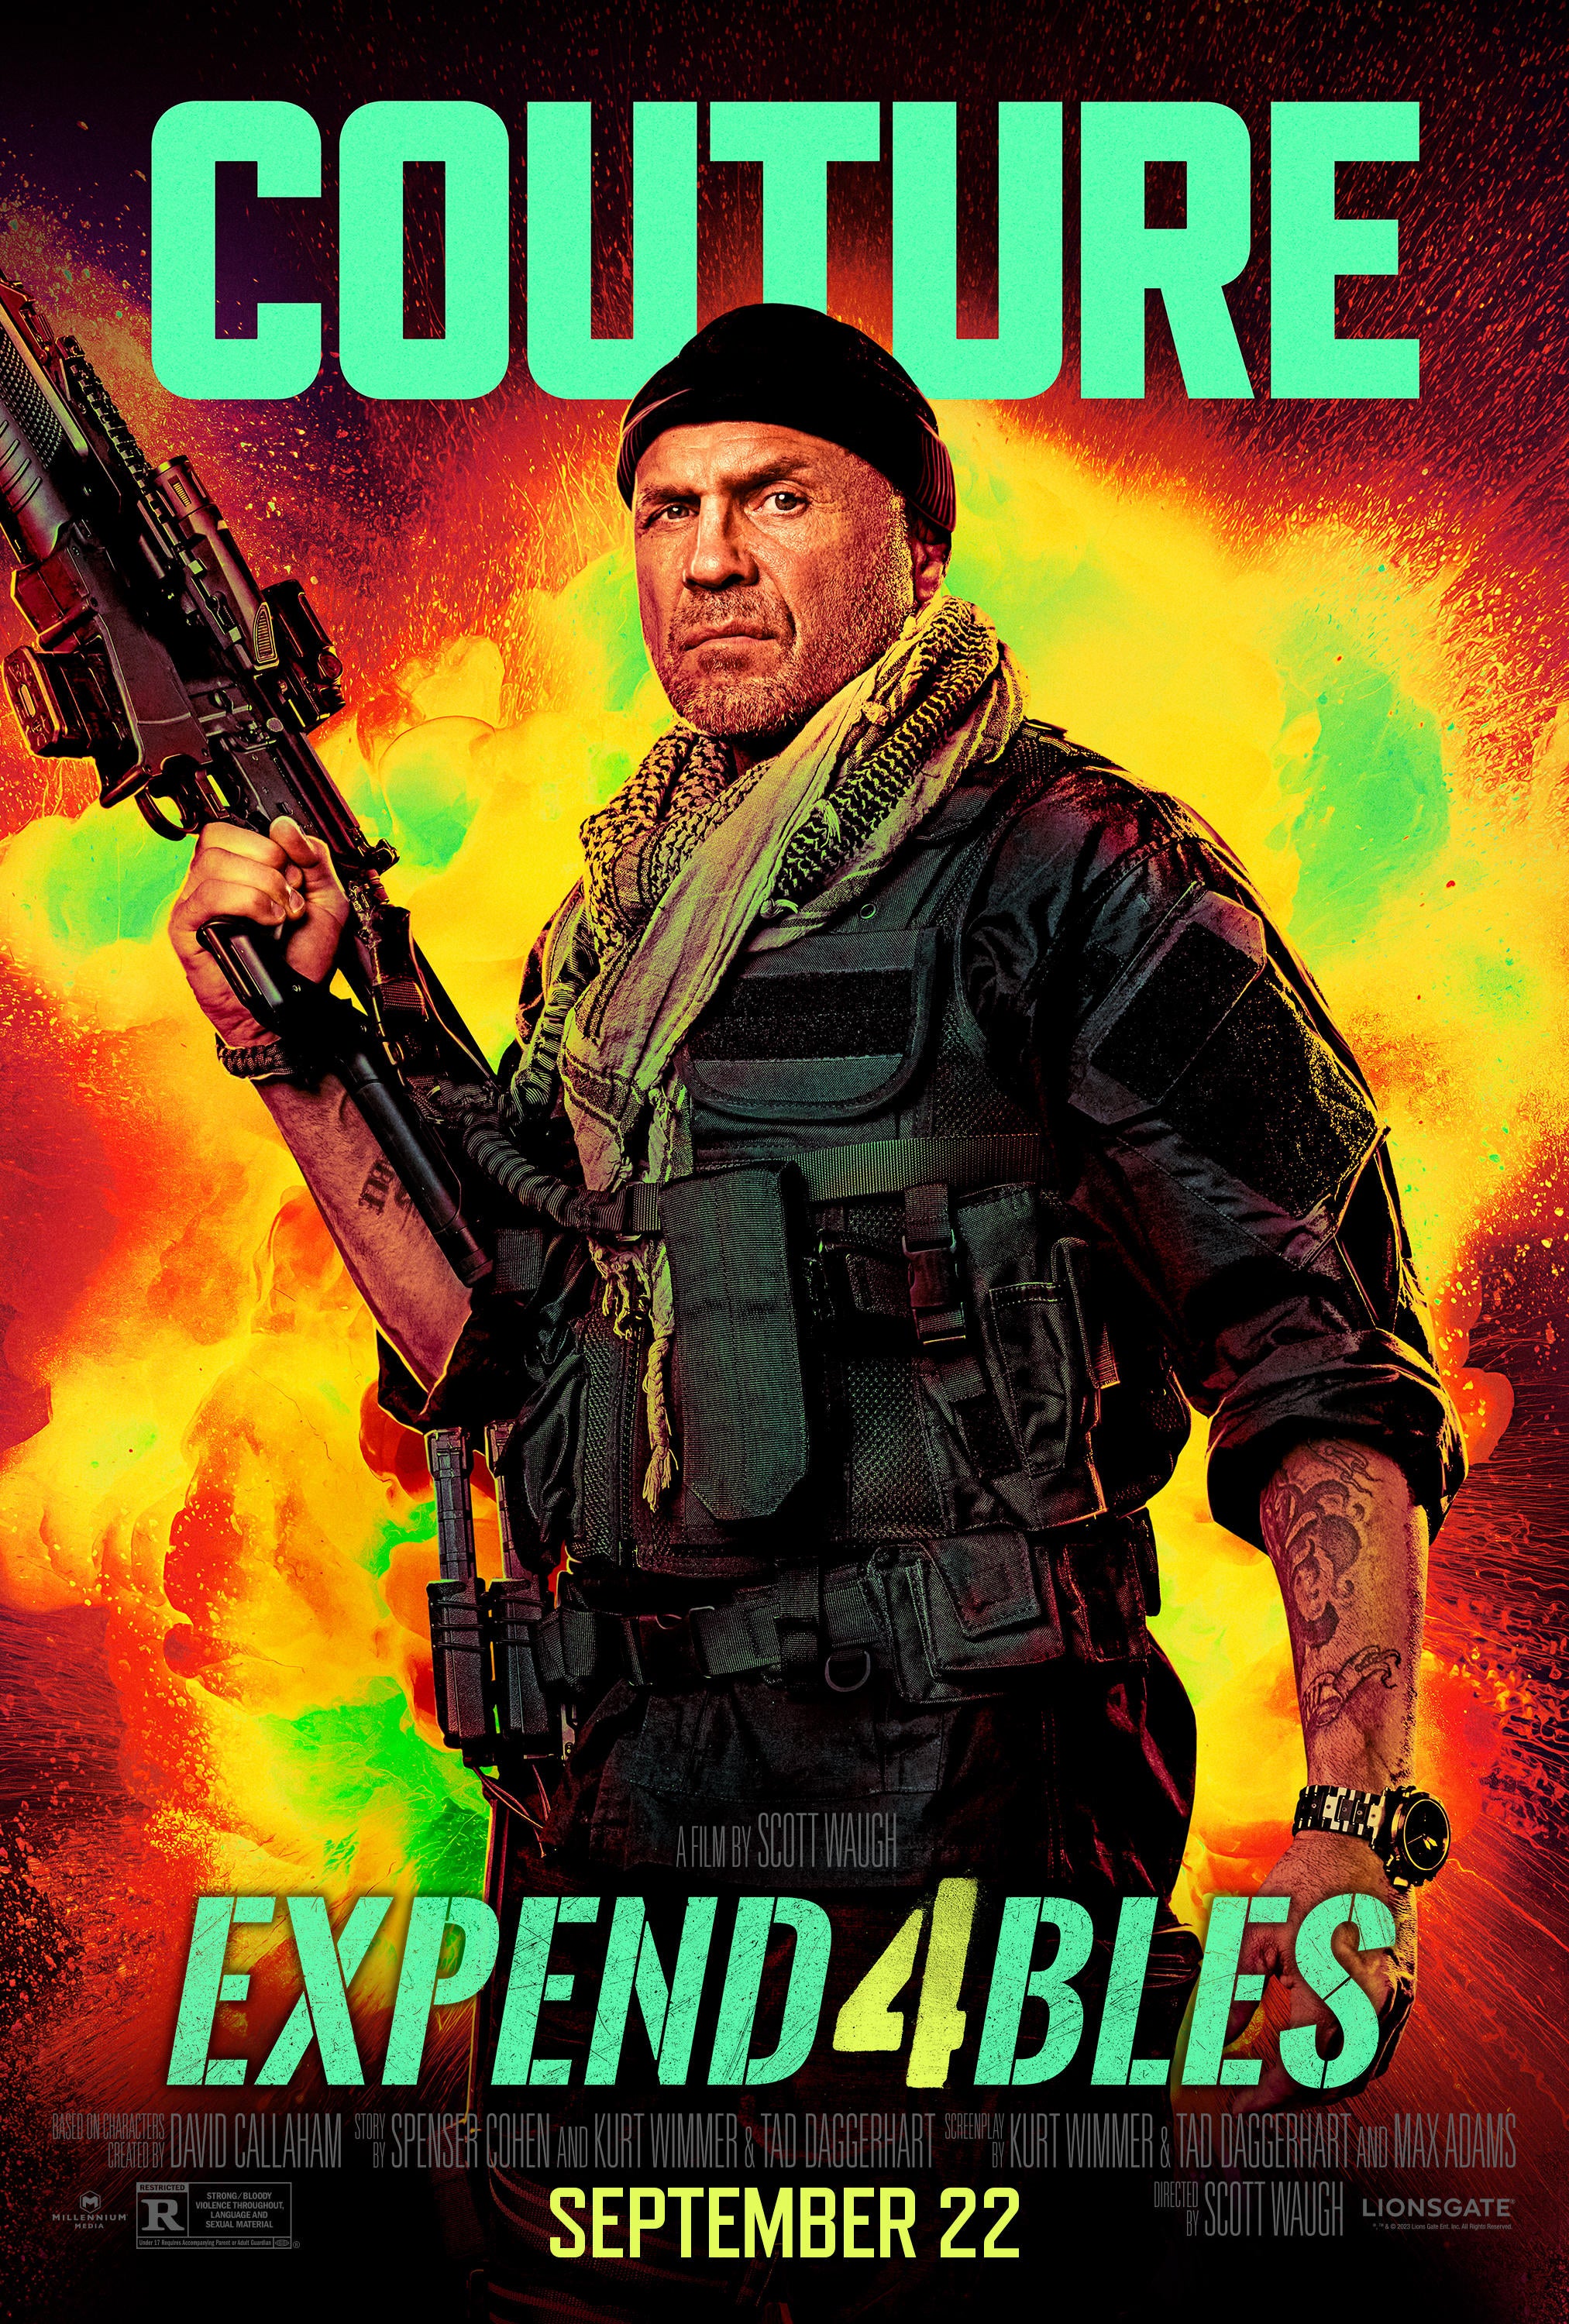 expendables-4-poster-randy-couture.jpg